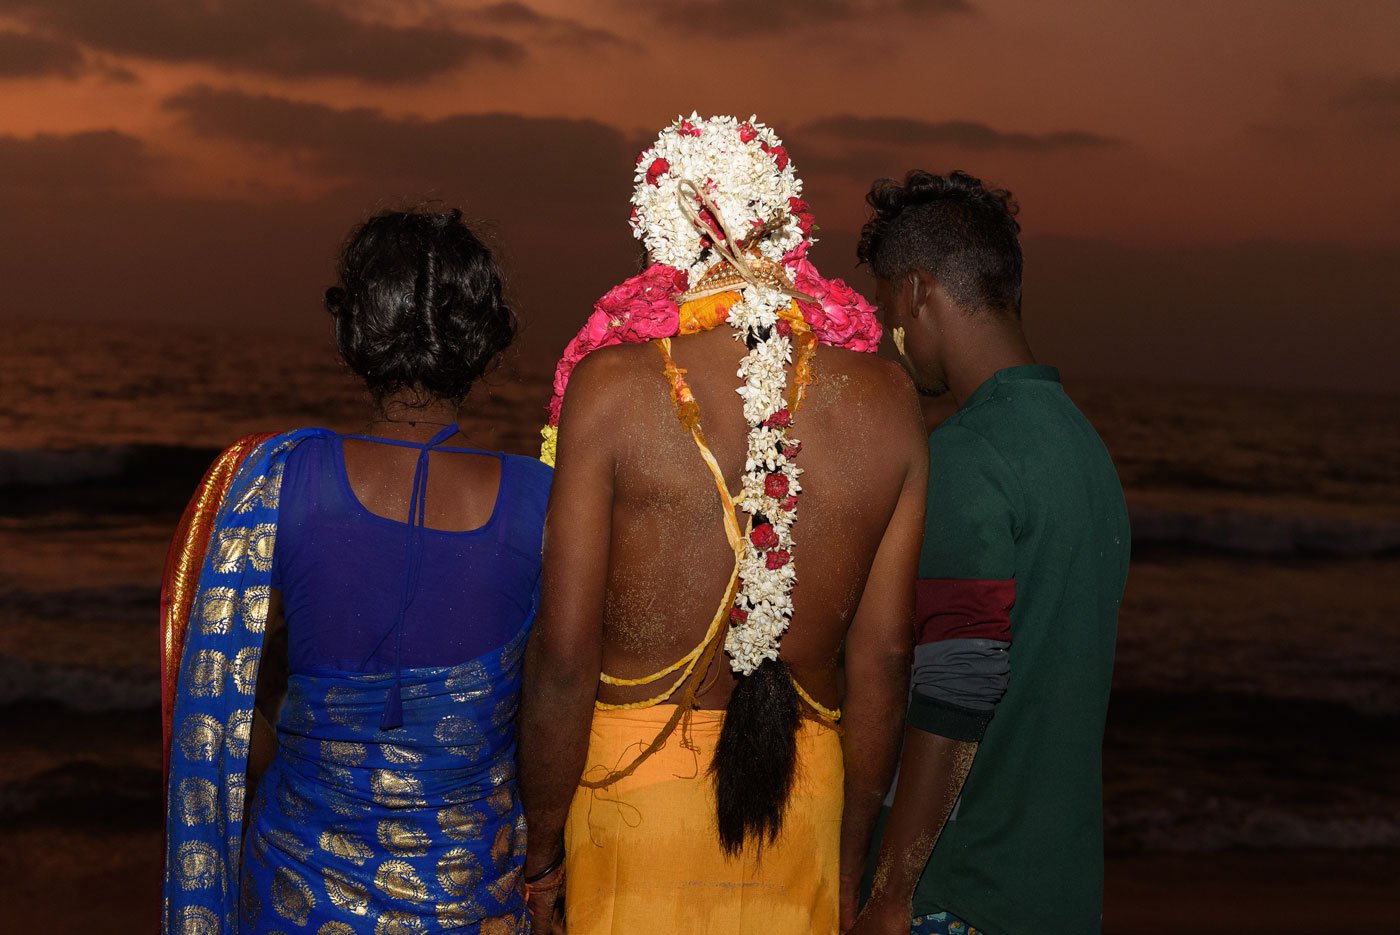 Men believed to be possessed by the goddess dress up in sarees and adorn their heads with flowers